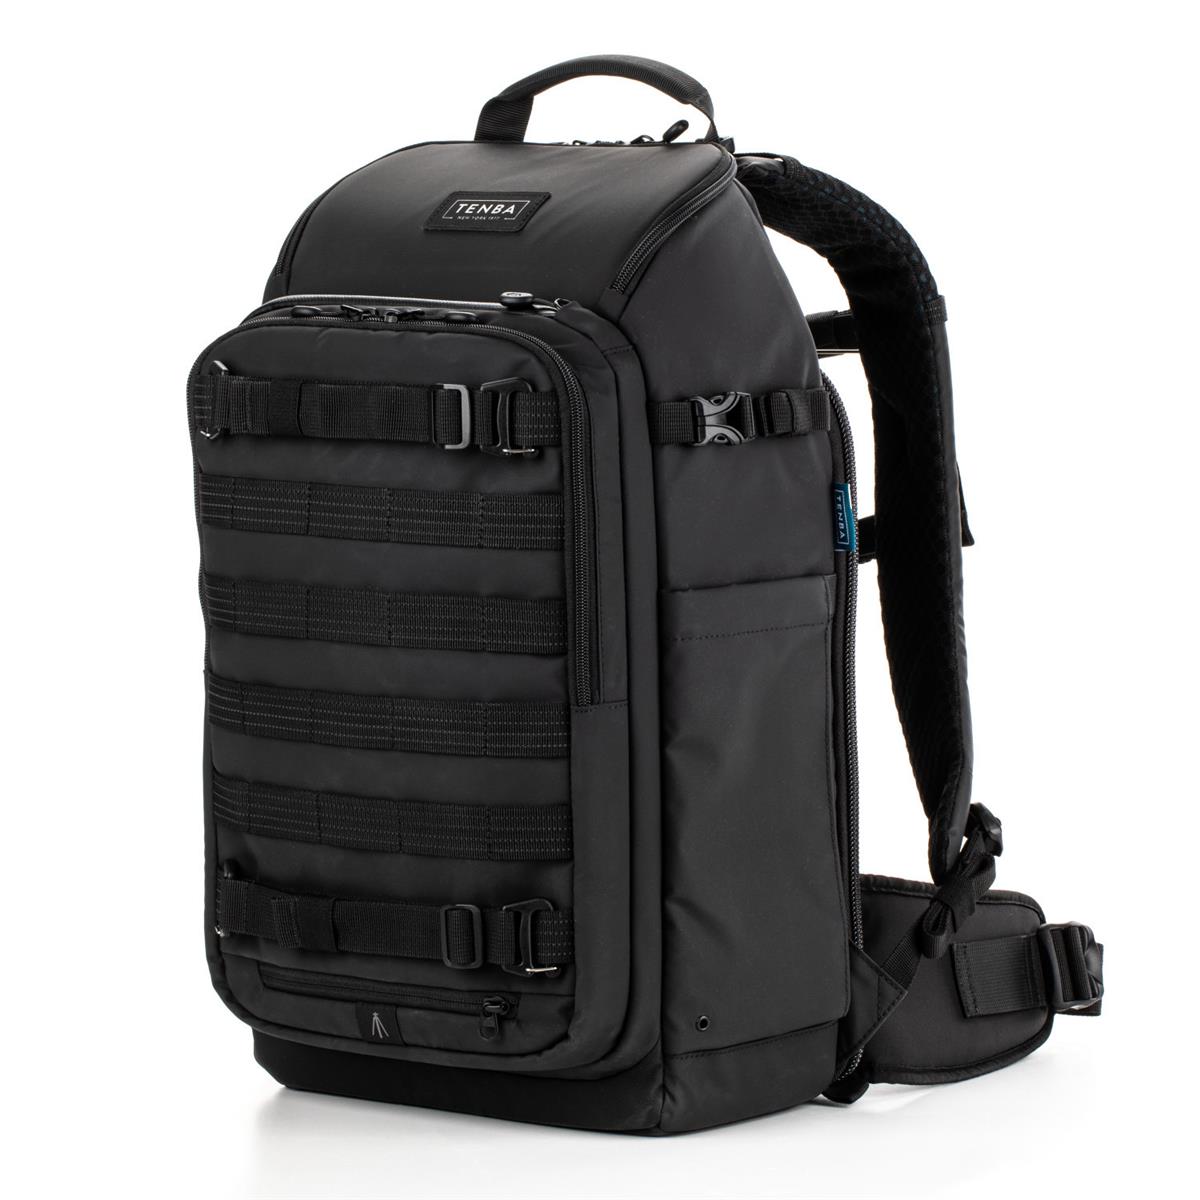 Image of Tenba Axis V2 20L Camera and Laptop Backpack